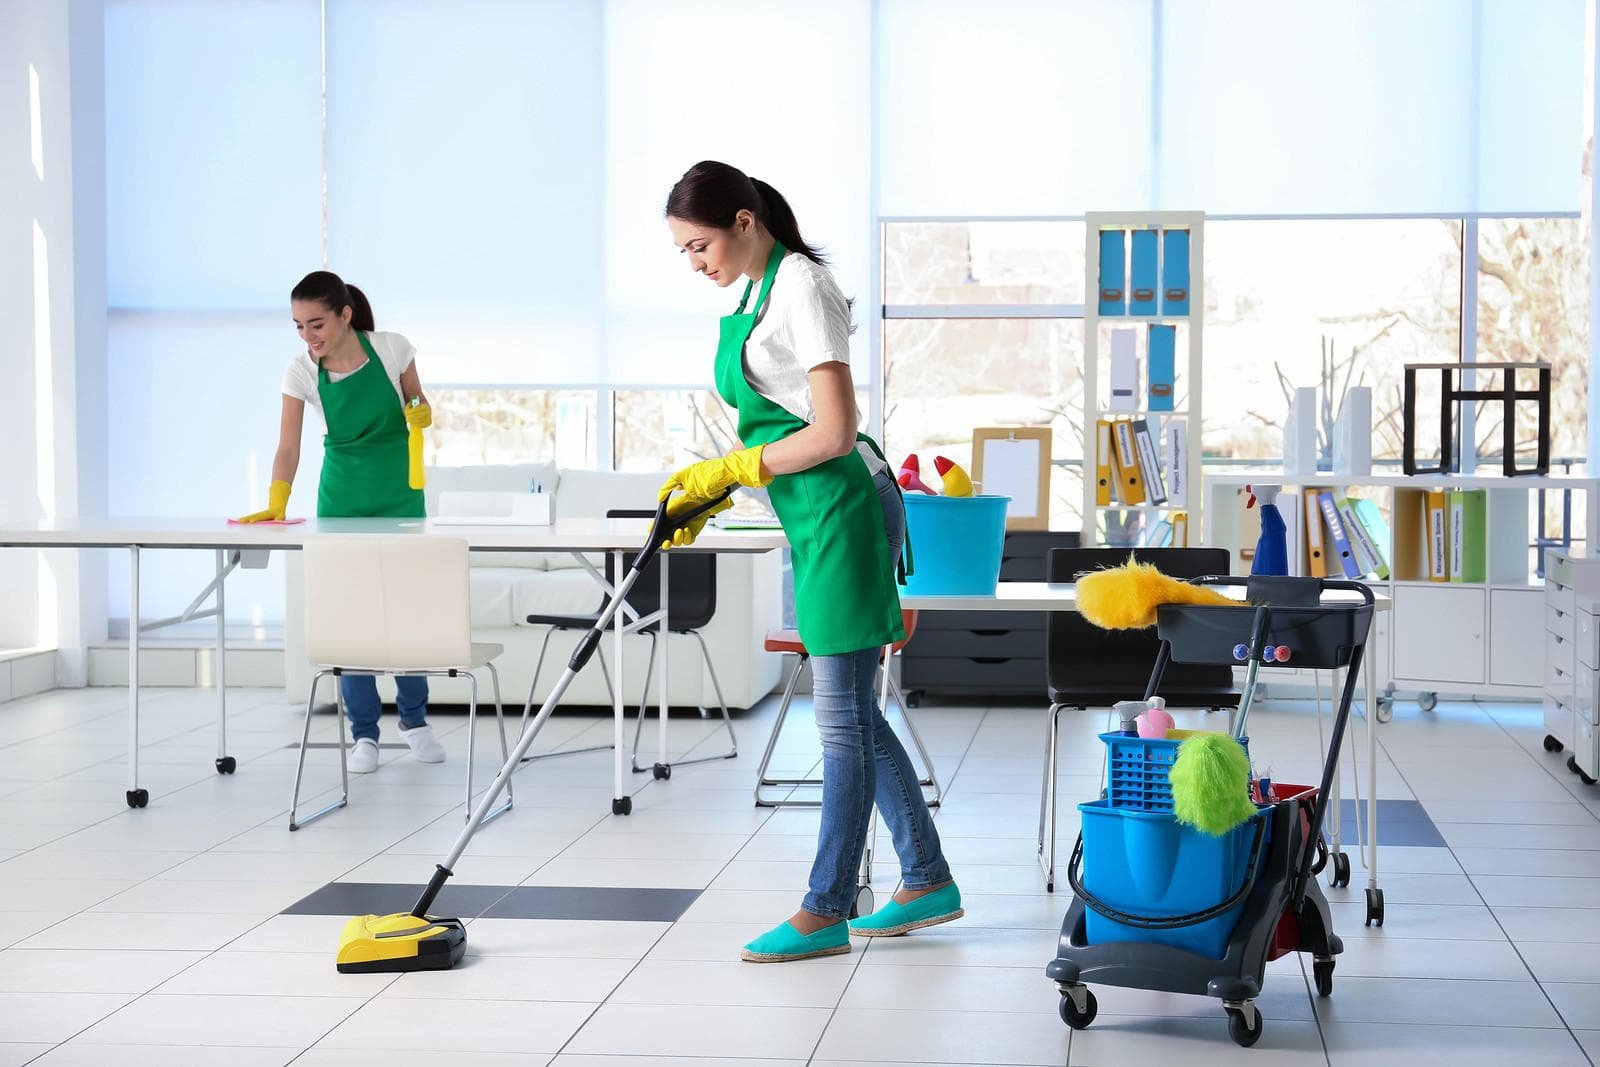 commercial-cleaners-cleaning-office-floors-1.jpg